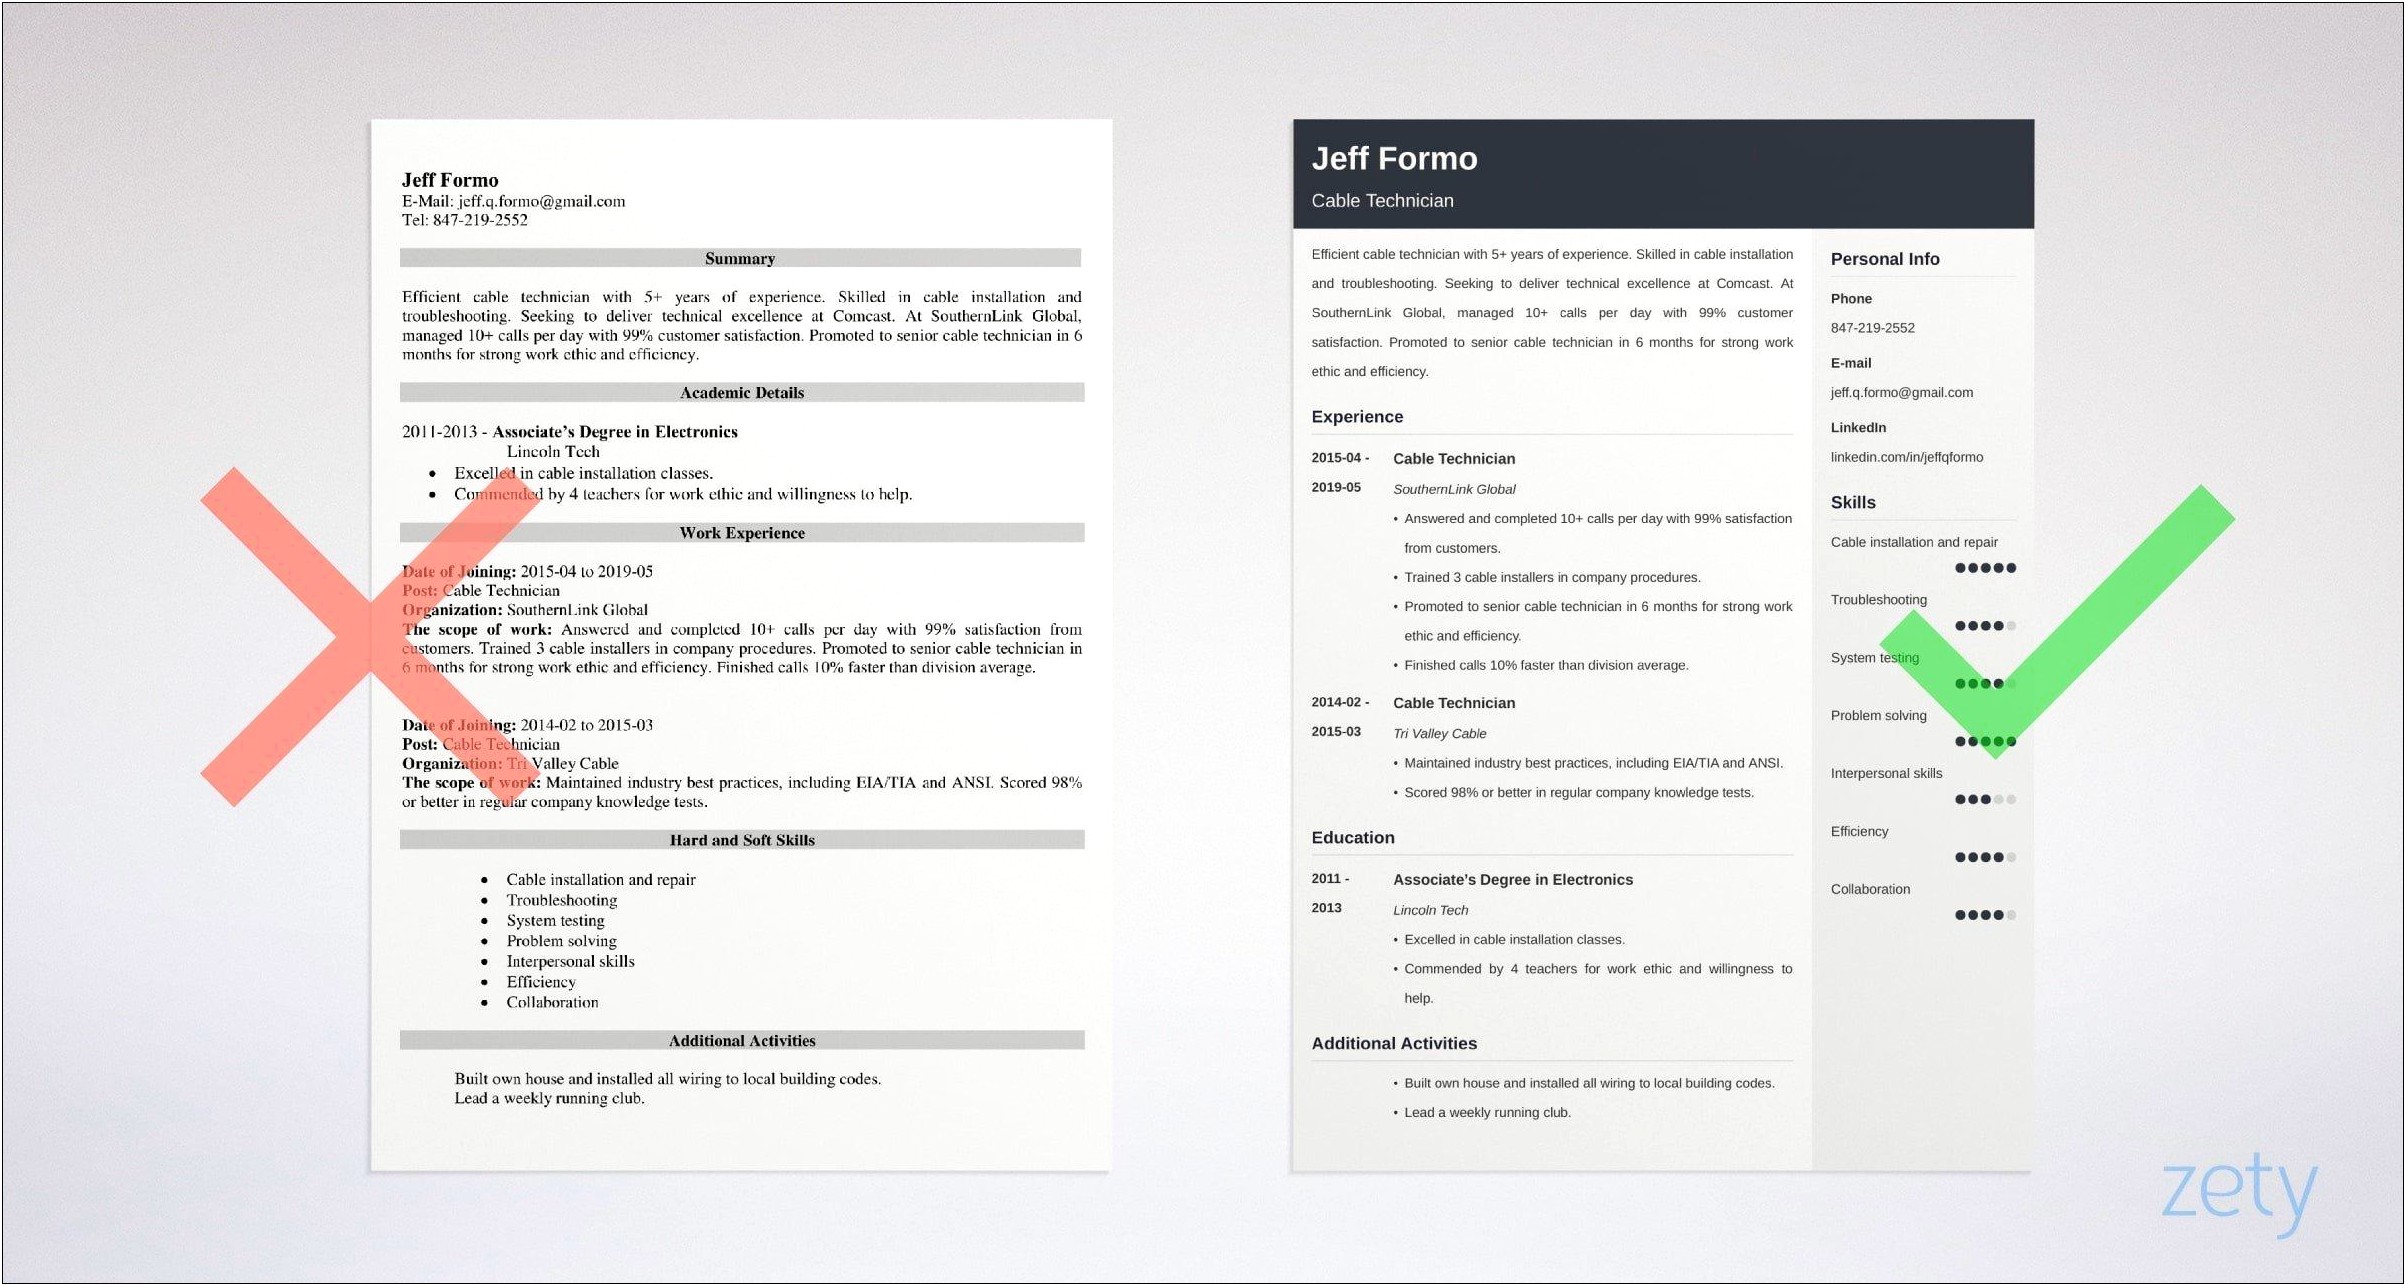 Sample Resume For A Cable Technicai